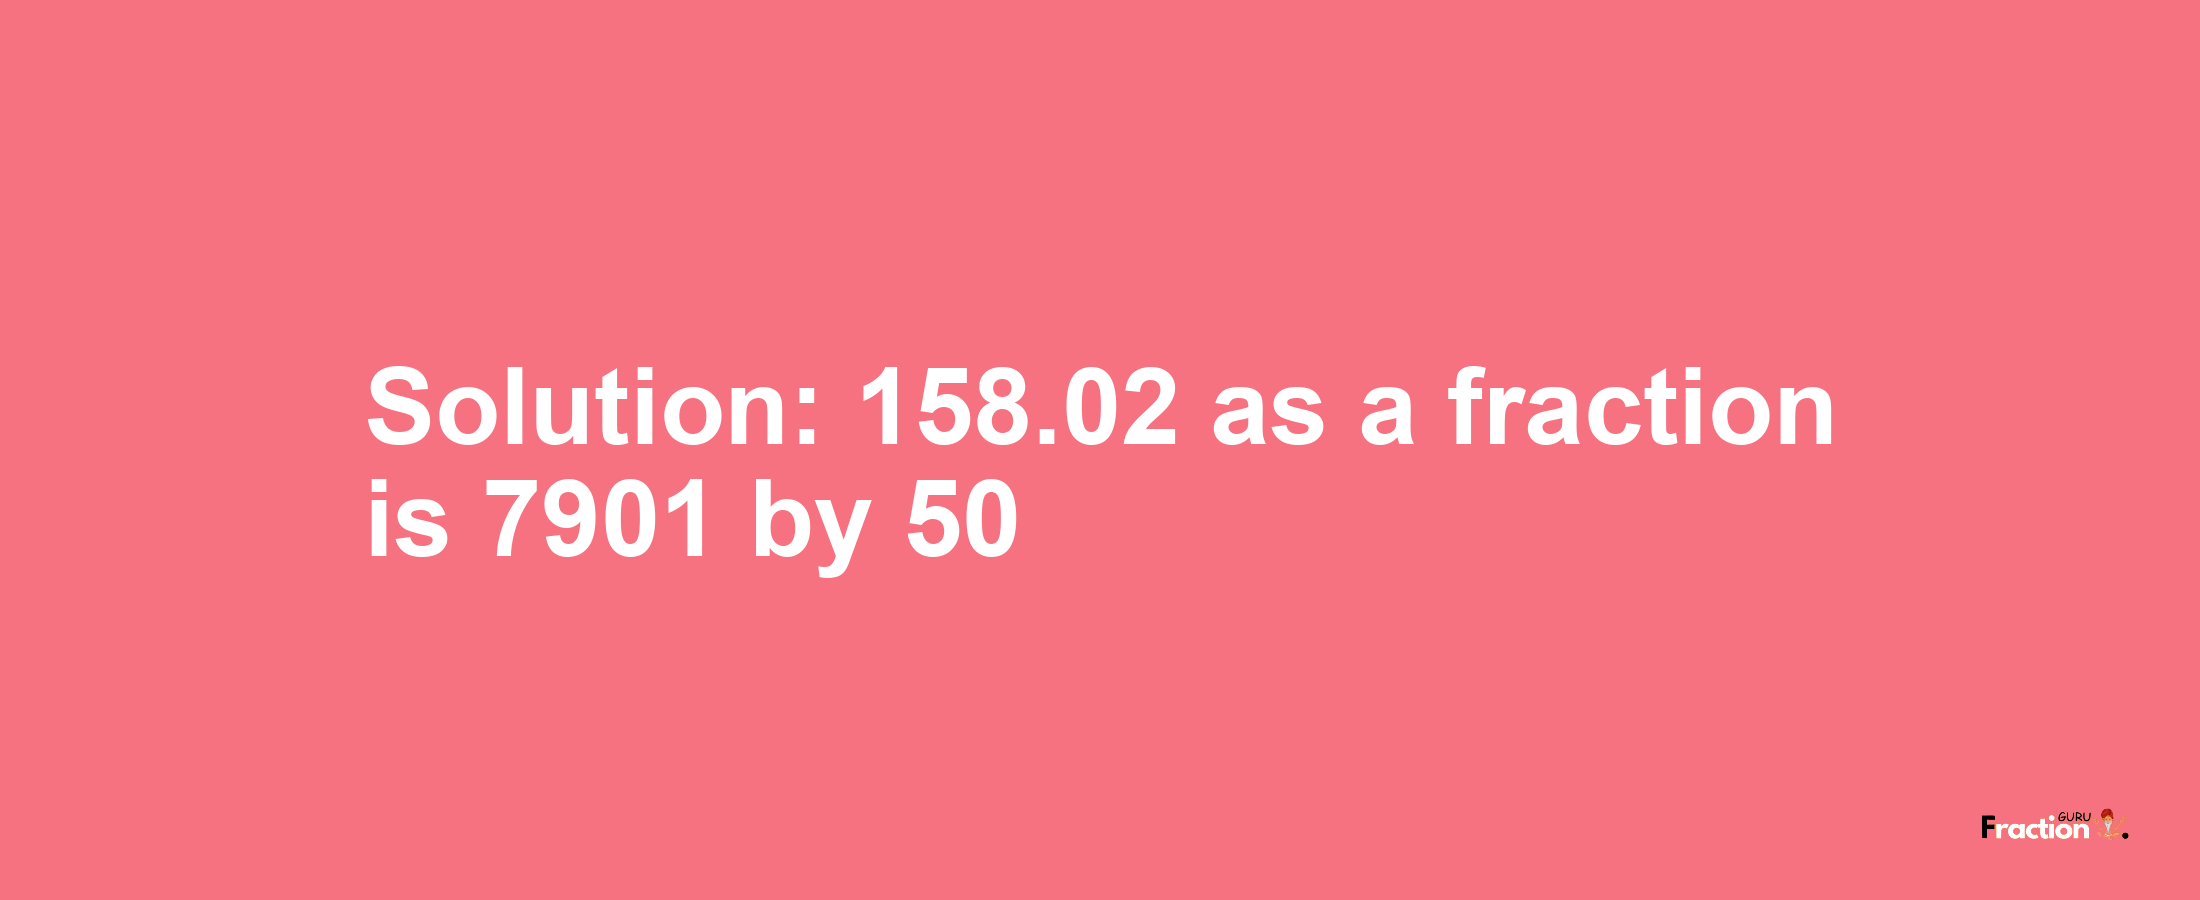 Solution:158.02 as a fraction is 7901/50